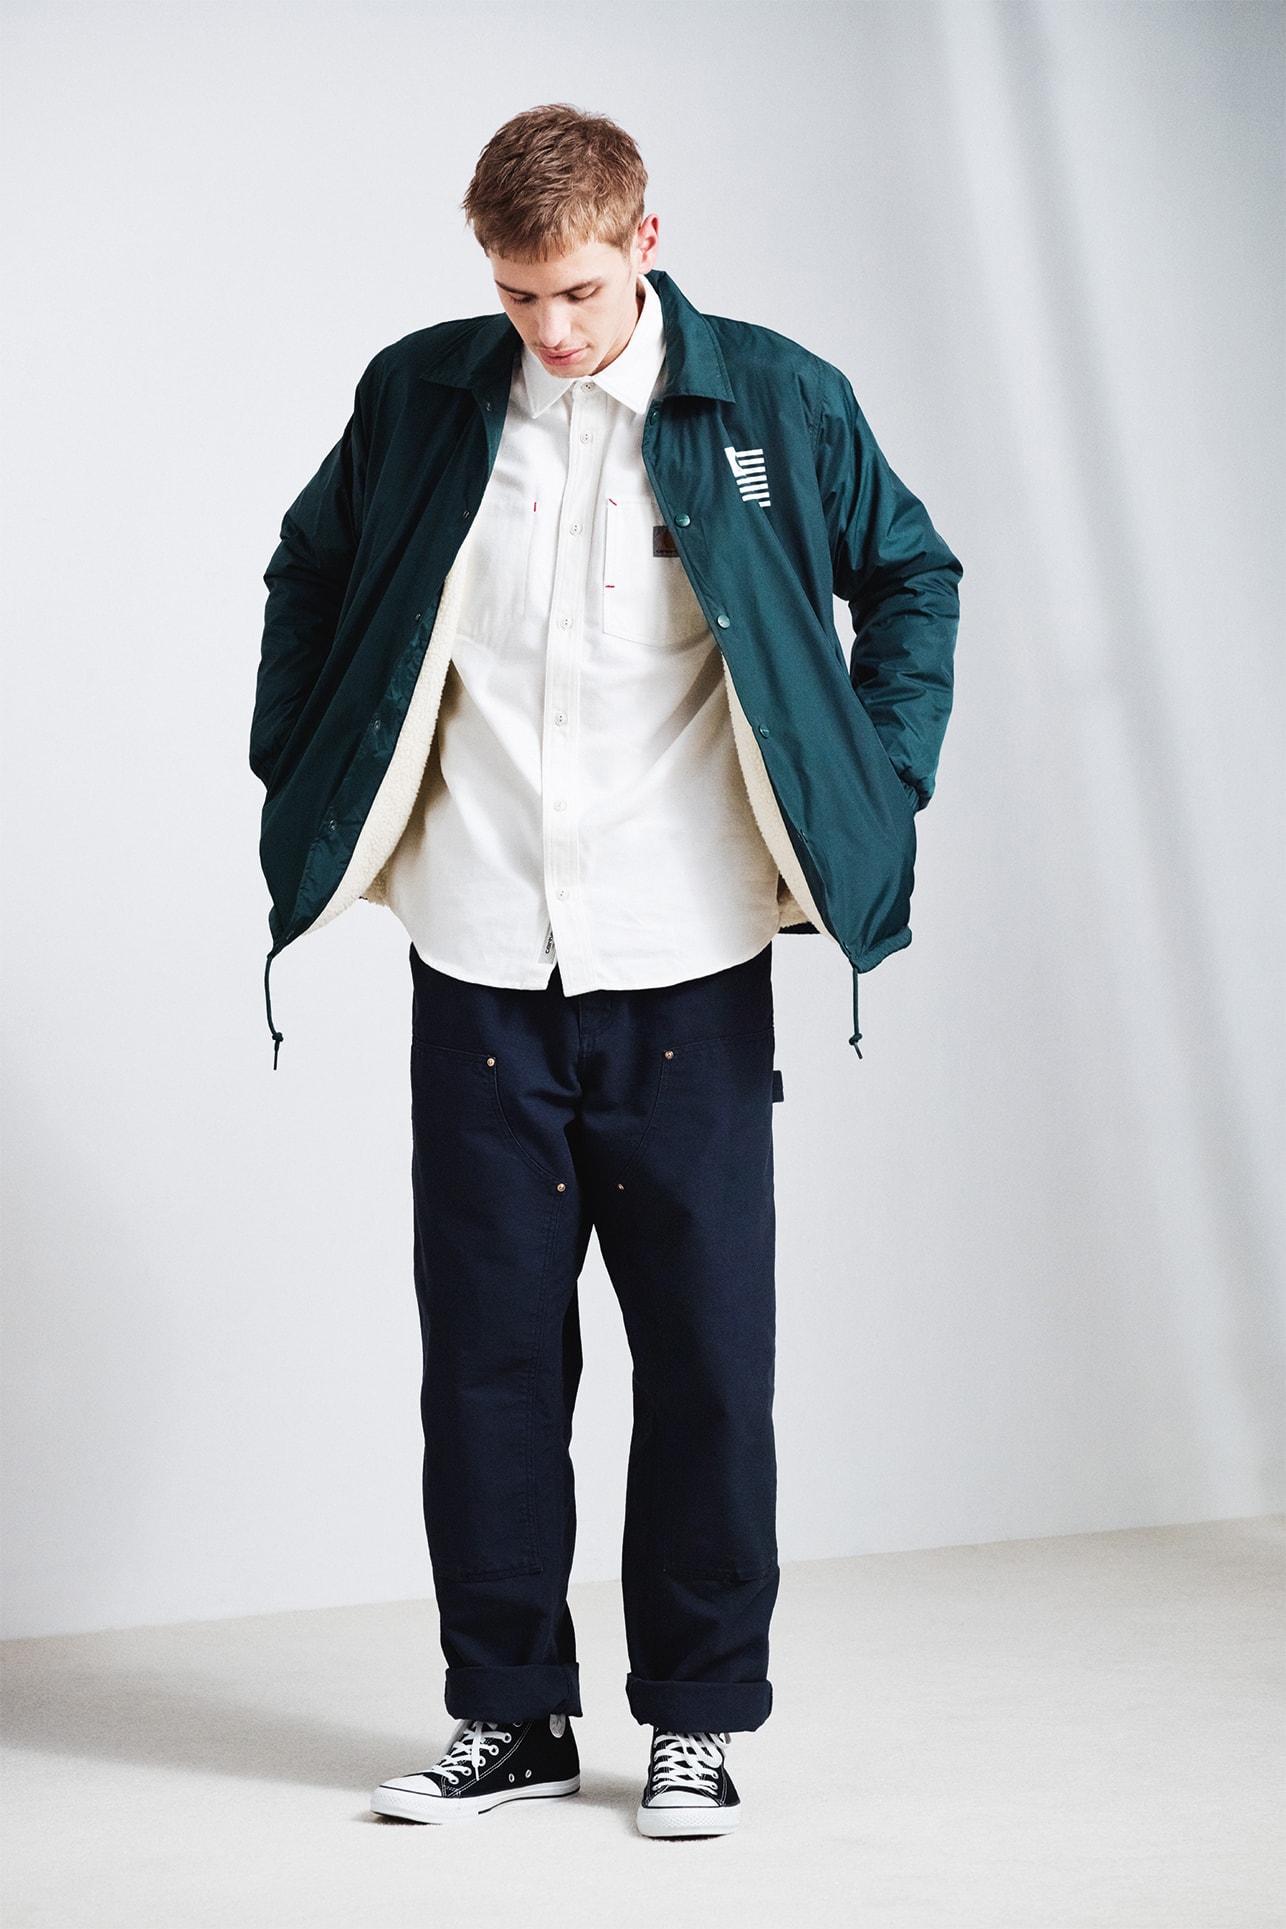 Carhartt WIP 2016 Fall Winter Collection